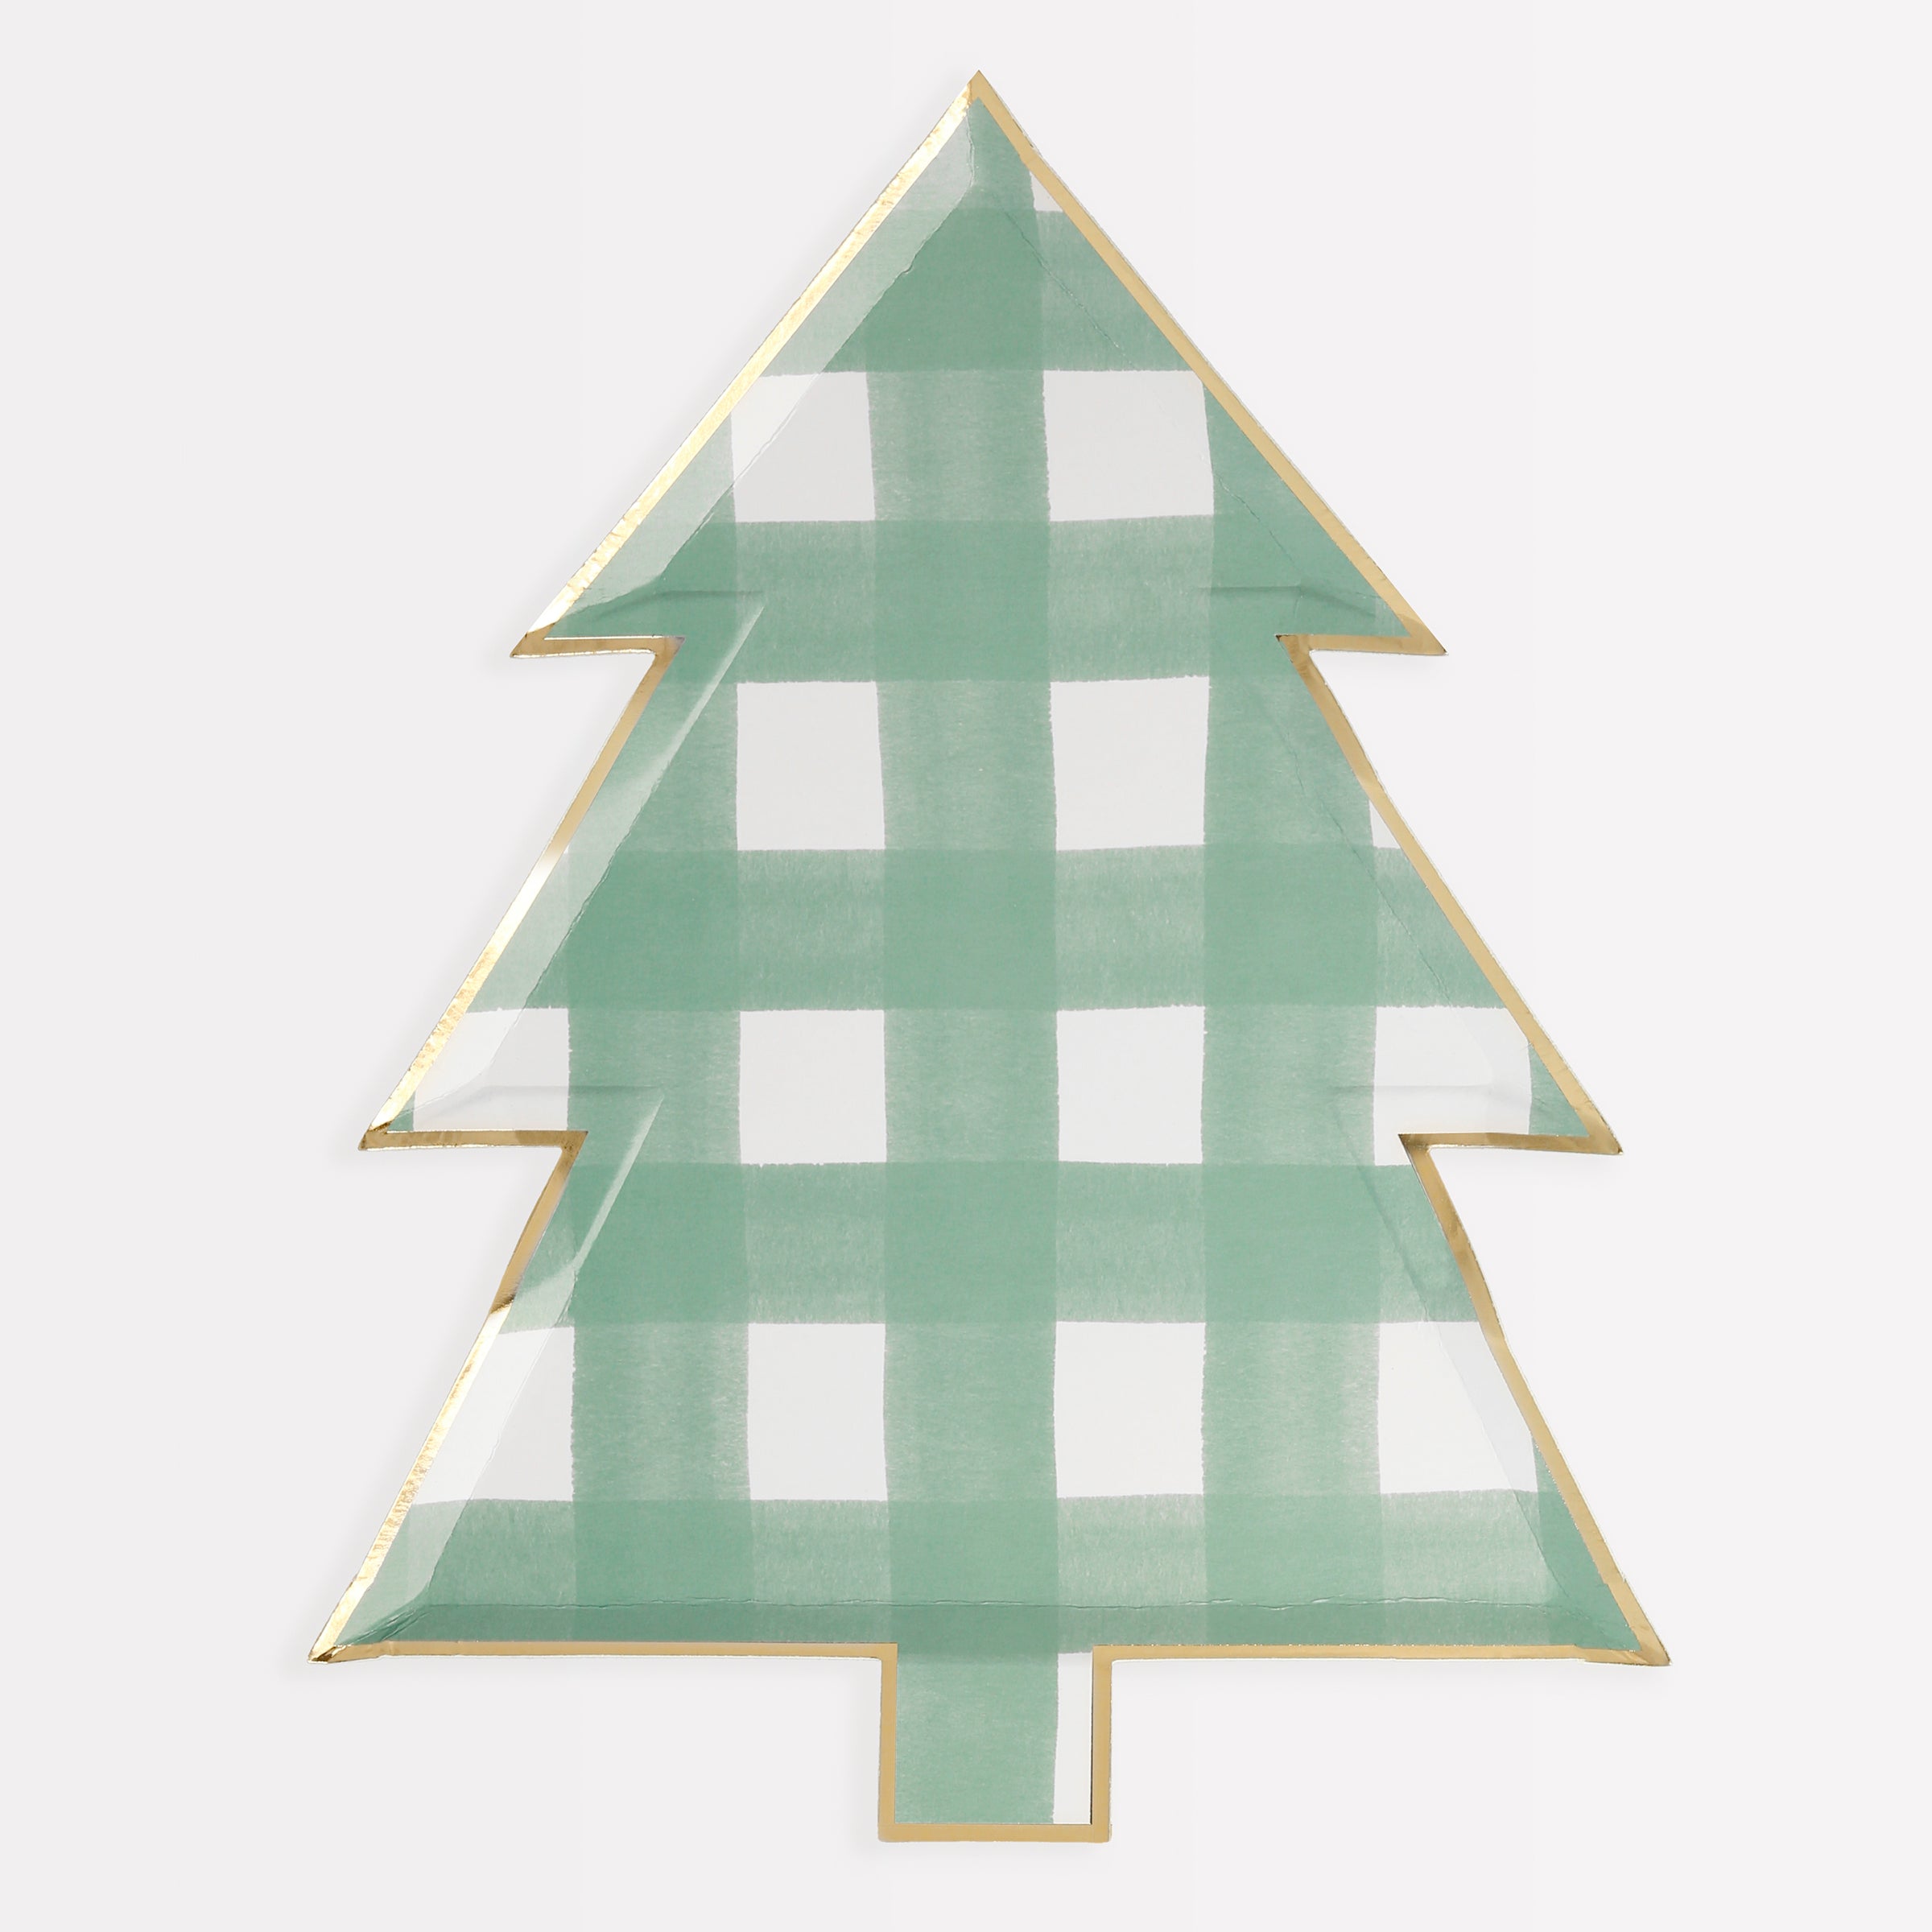 Our Christmas tree plates, with gorgeous gingham design, will look spectacular at your Christmas table setting.